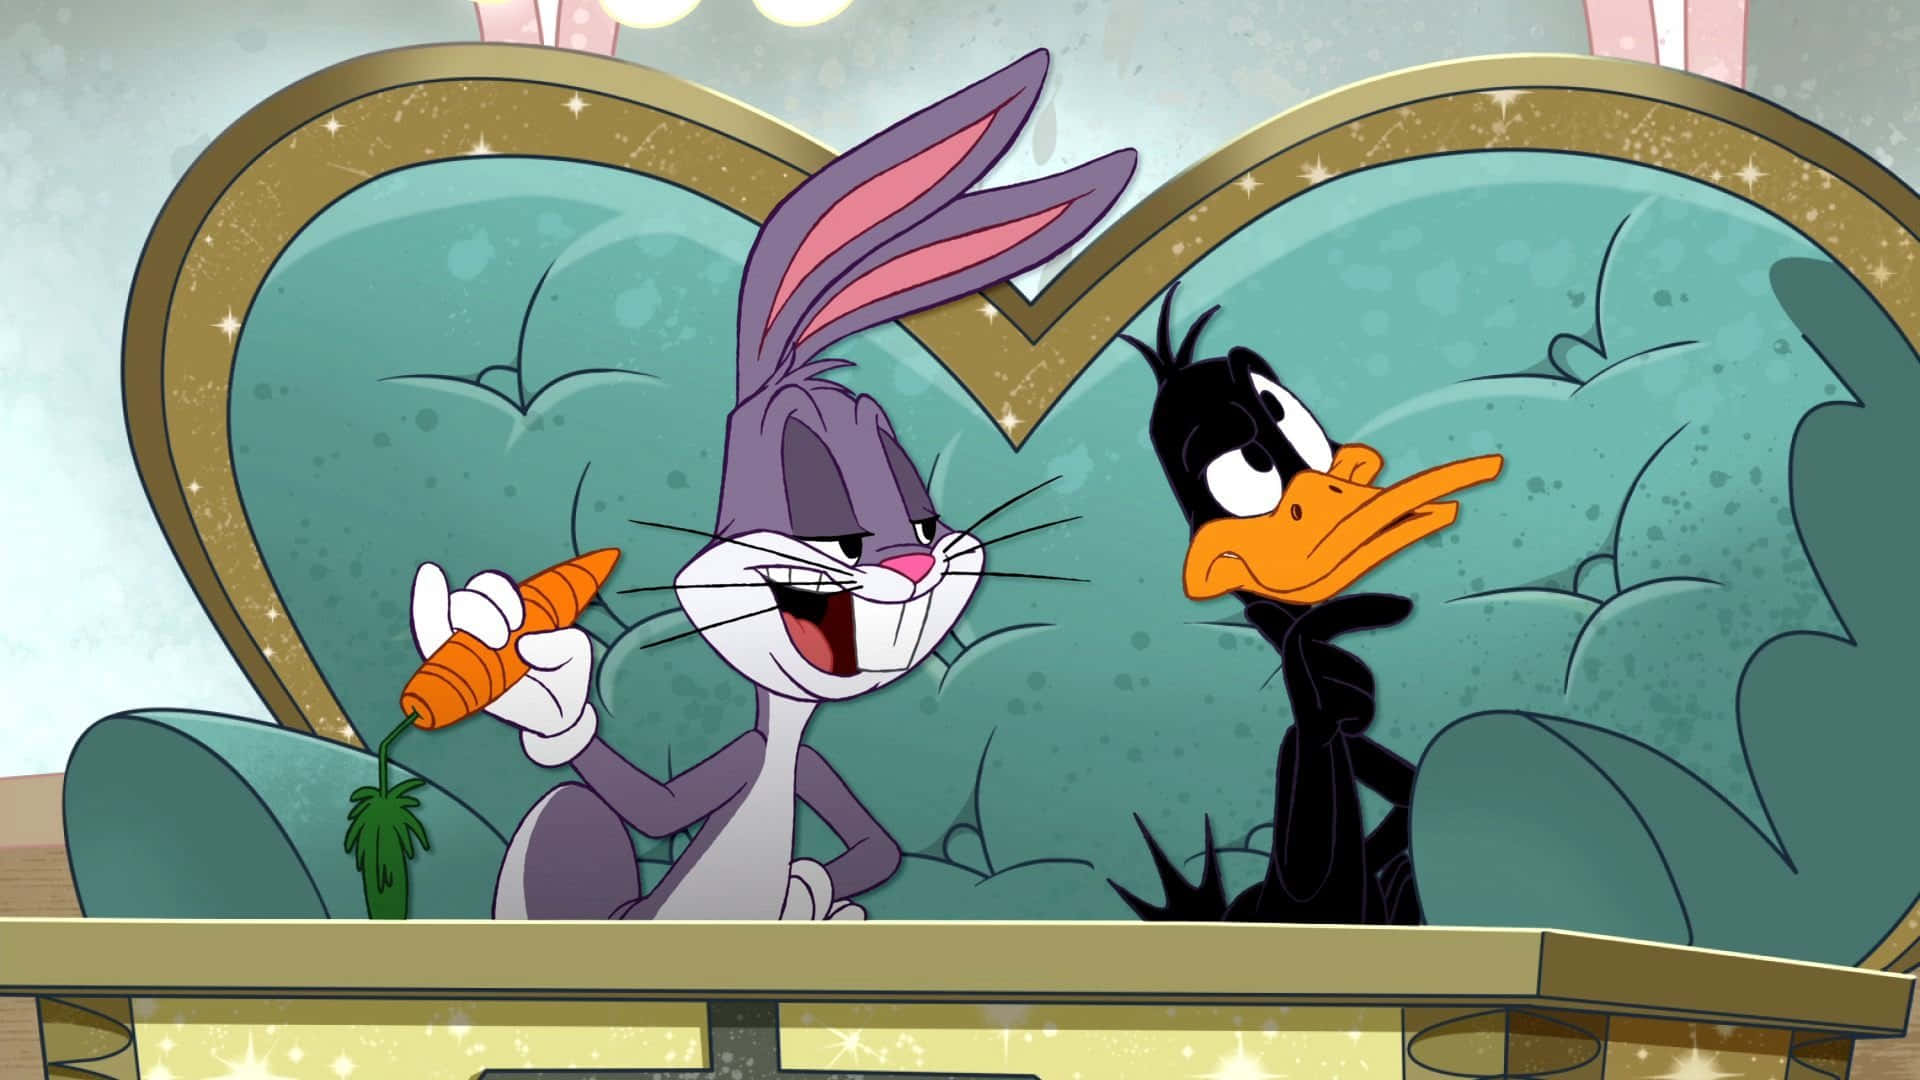 Join the gang from Looney Tunes for an adventure like no other